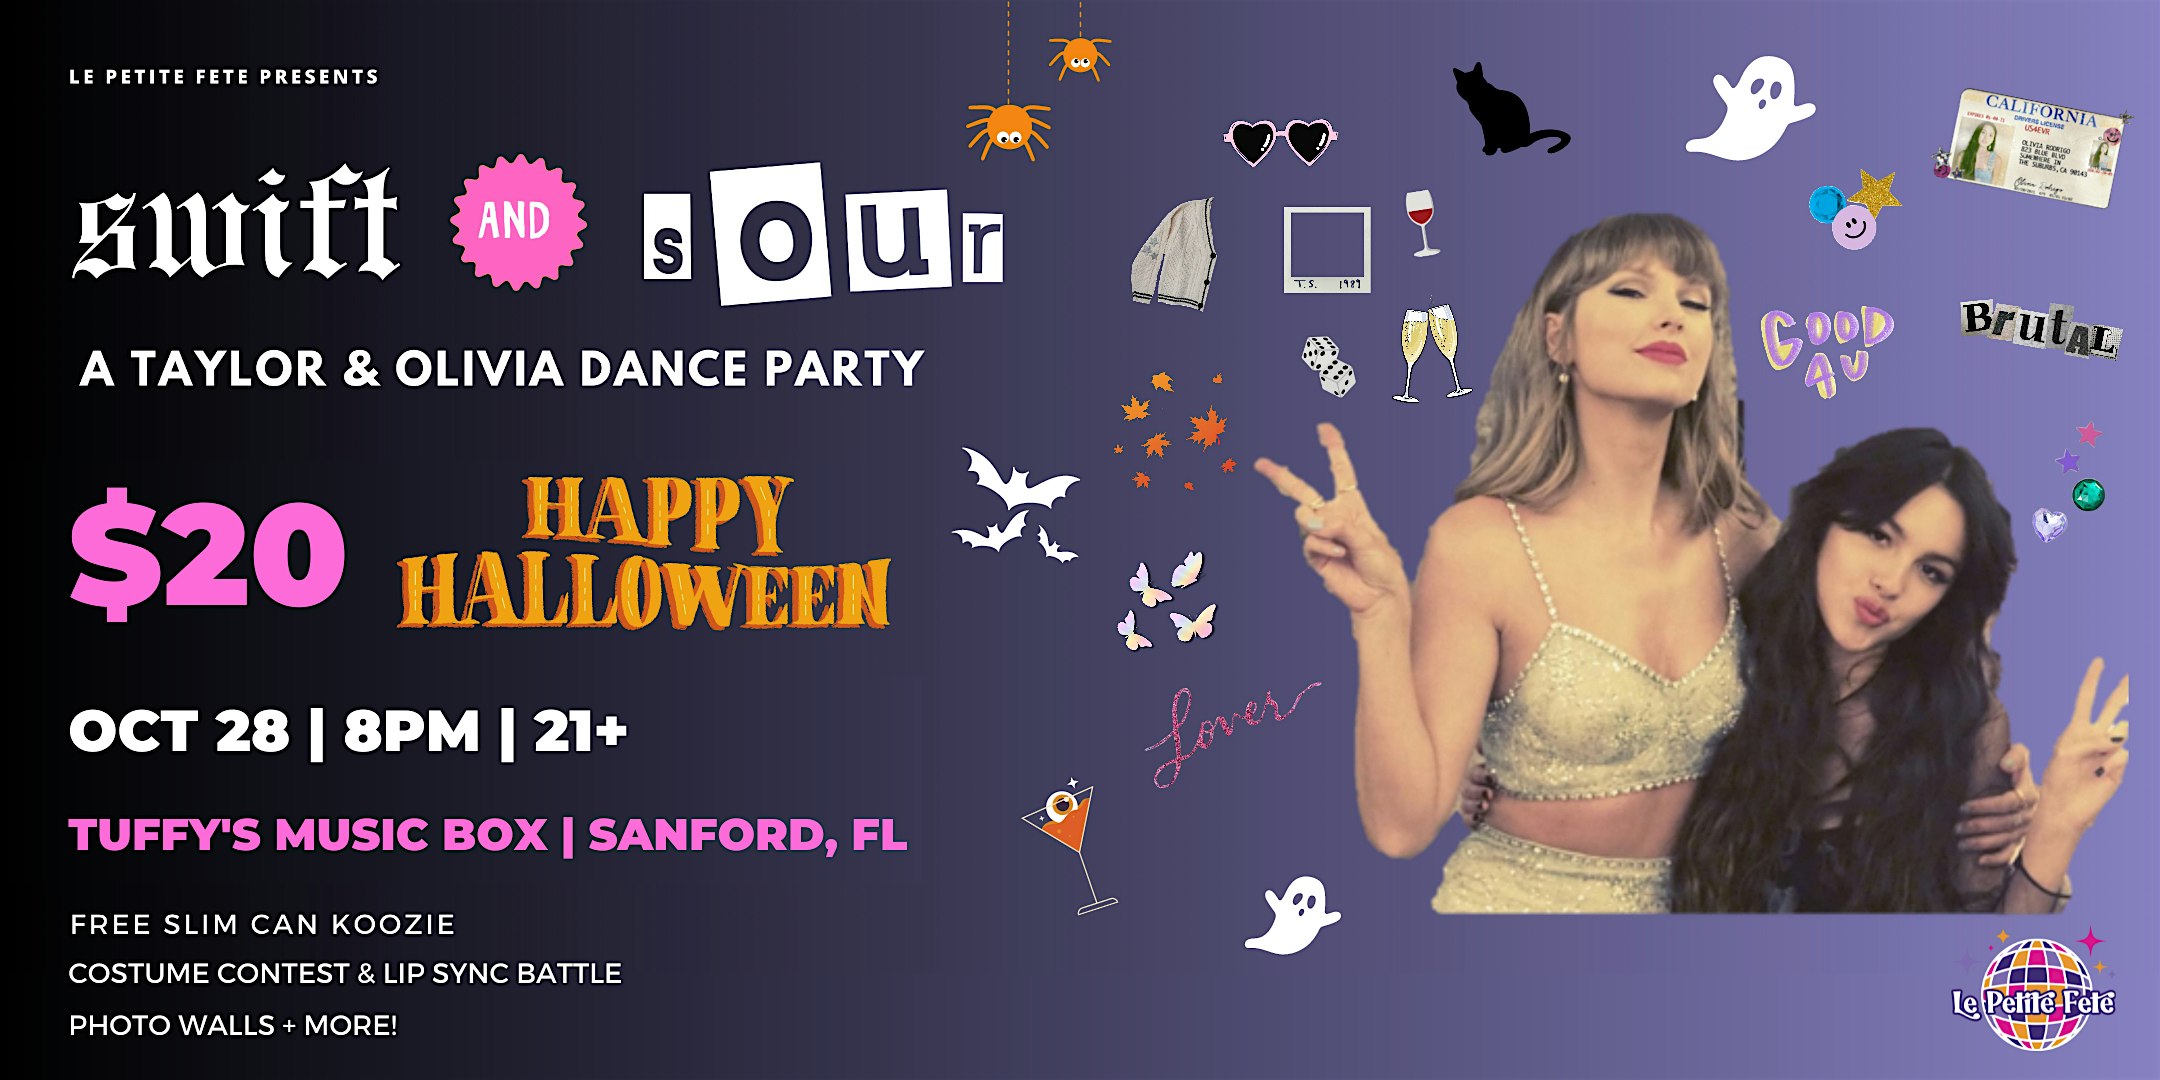 Swift & Sour: A Taylor Swift Inspired Dance Party in Sanford